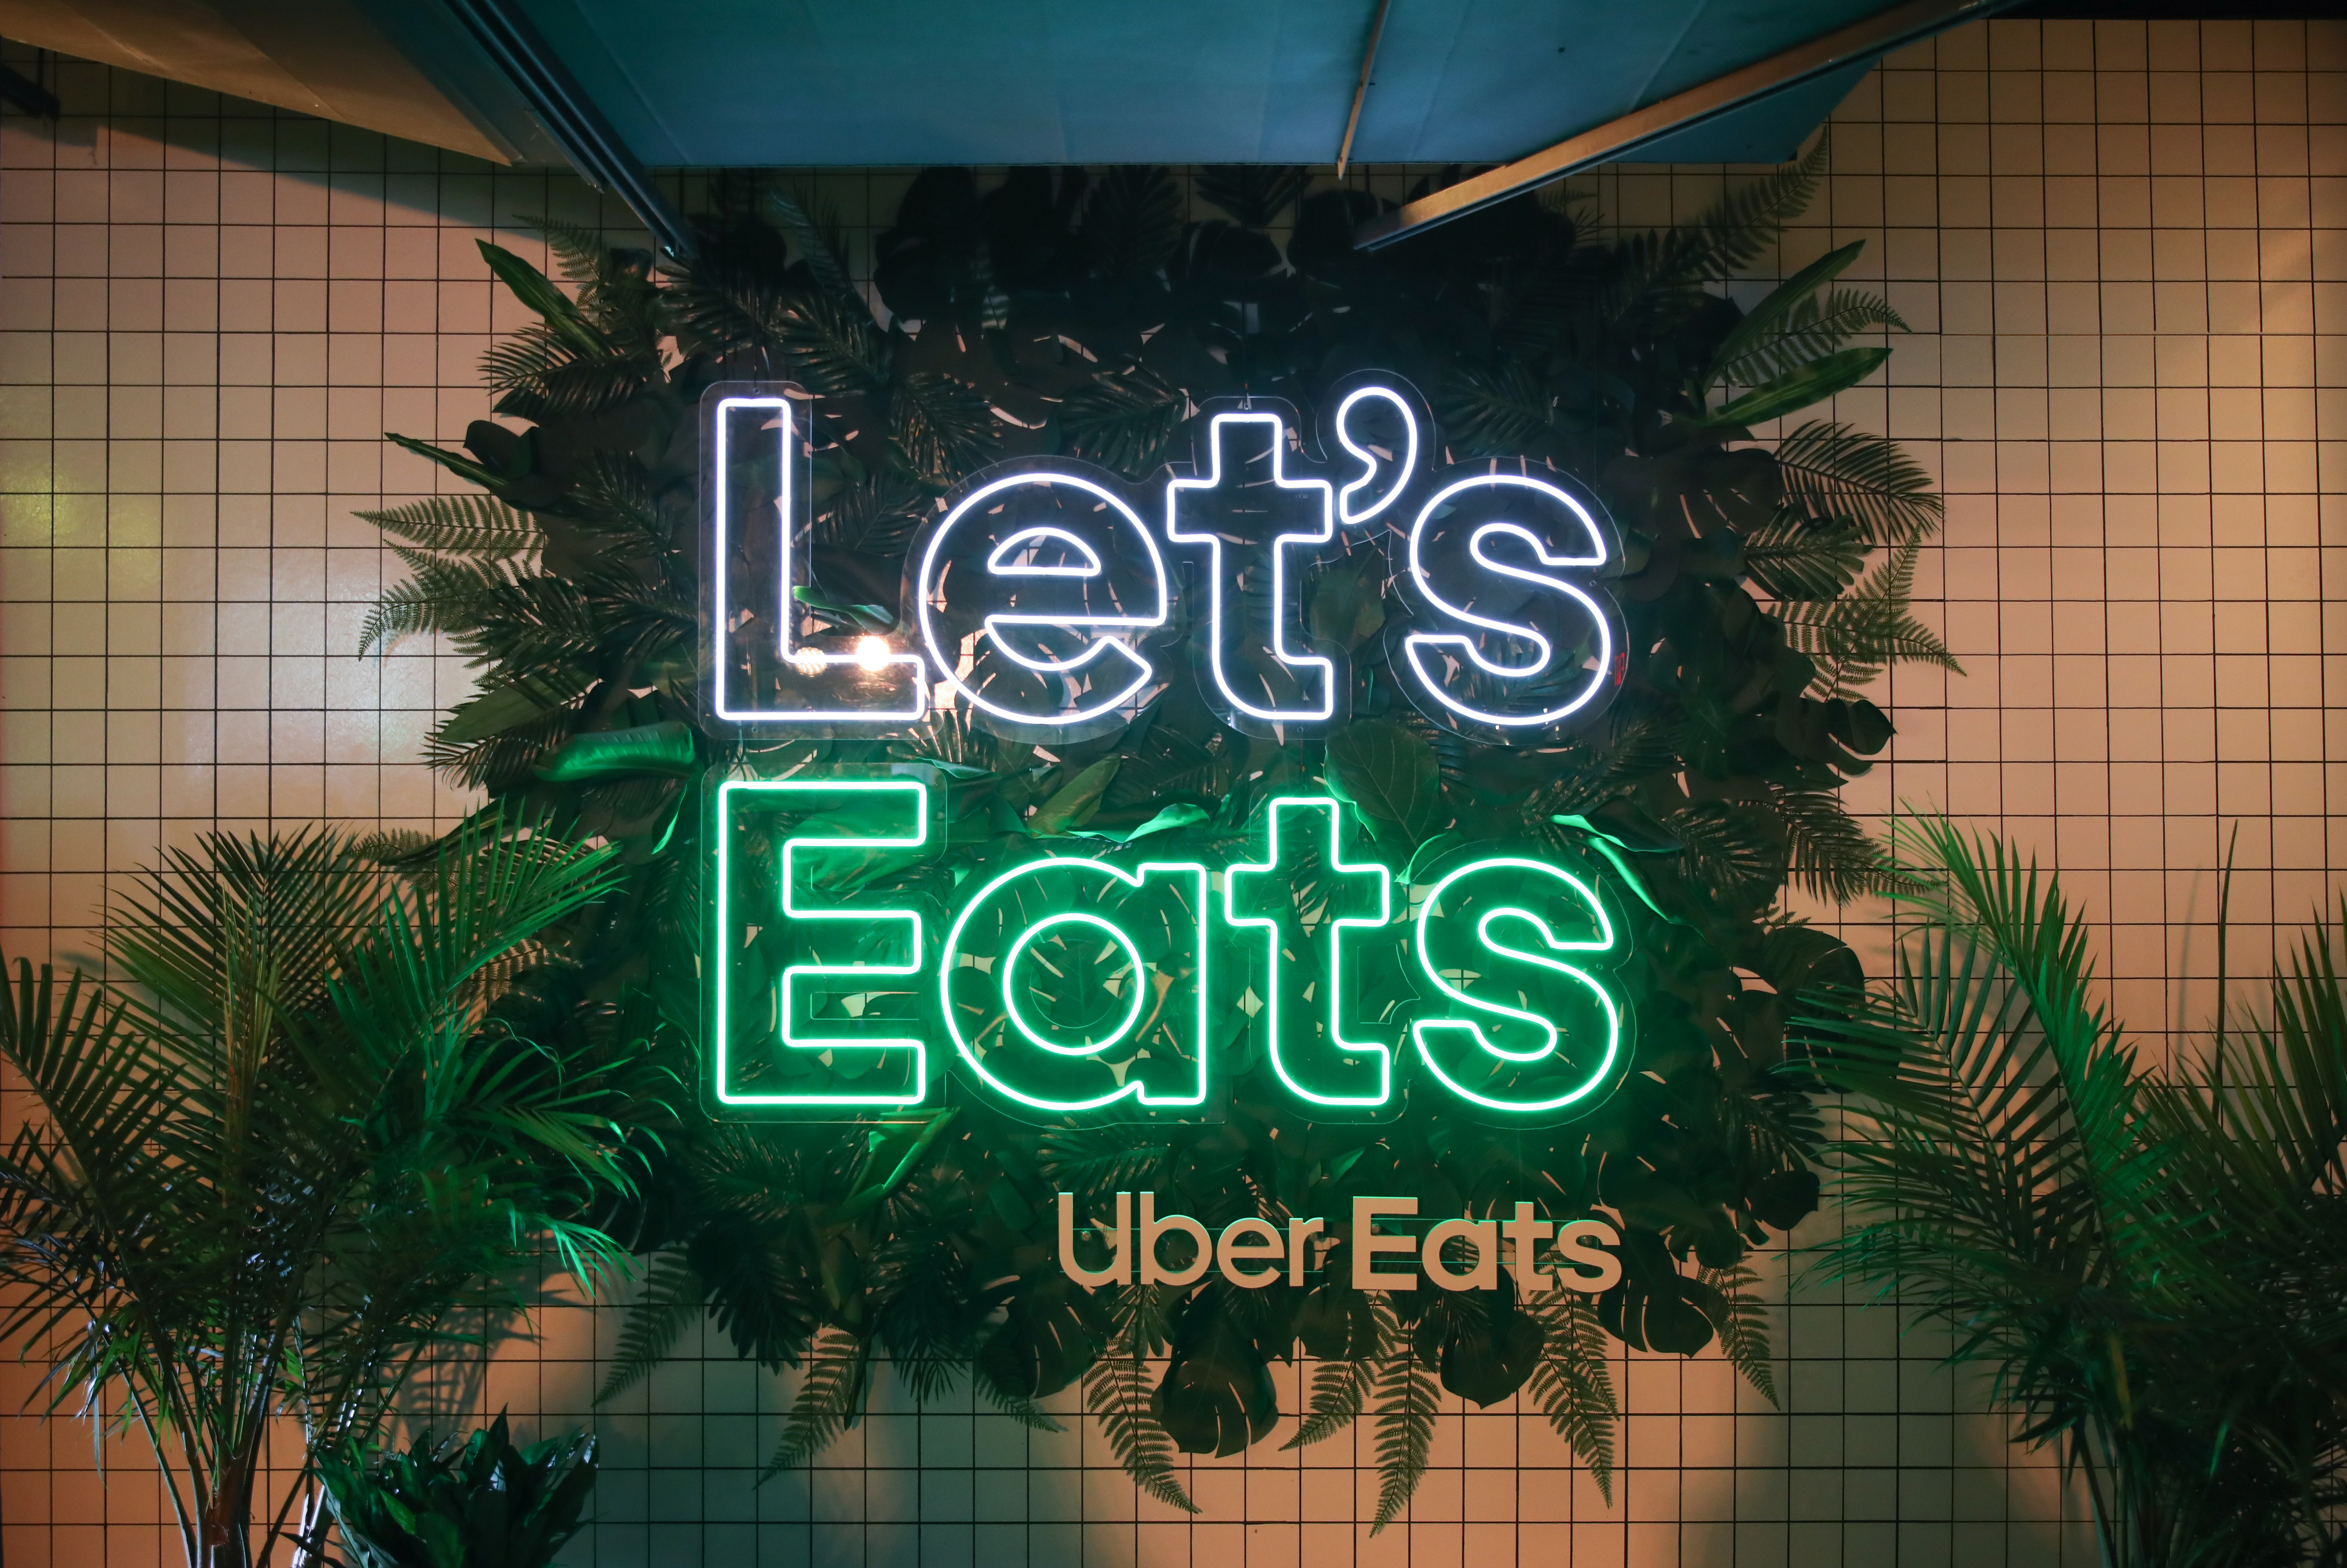 Uber Eats house during SXSW on March 14, 2019 in Austin, Texas. The neon sign reads, “Let’s Eats Uber Eats.”